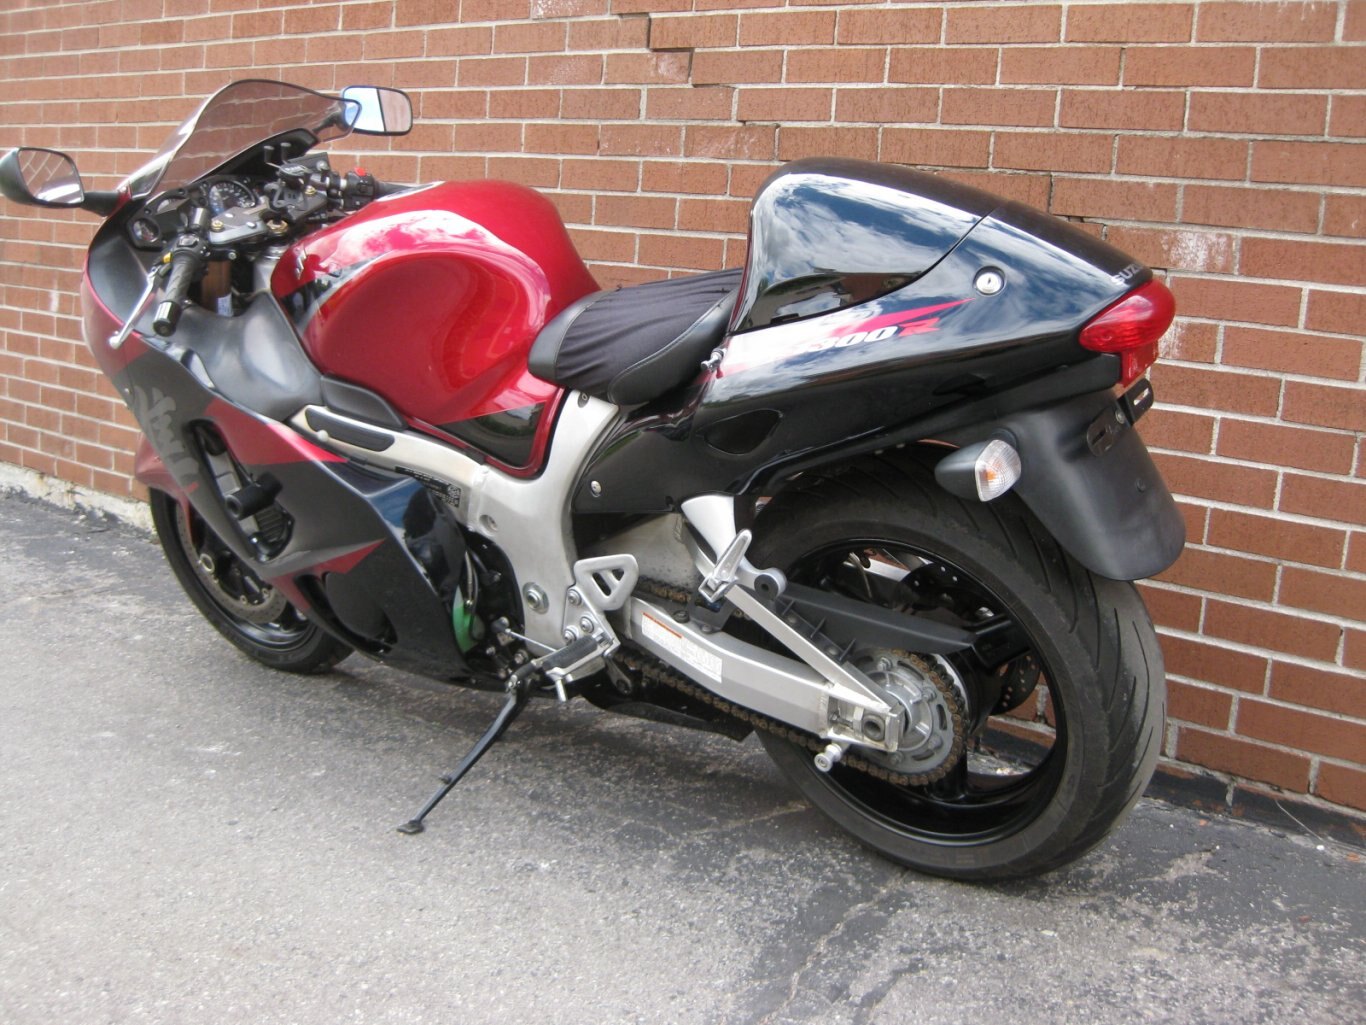 2006 Suzuki GSX1300R Hayabusa THIS SLEEK, LONG, LOW, MEAN, MACHINE RATED THE FASTEST PRODUCTION MOTORCYCLE FOR 2006 WITH 155.9 HORSEPOWER